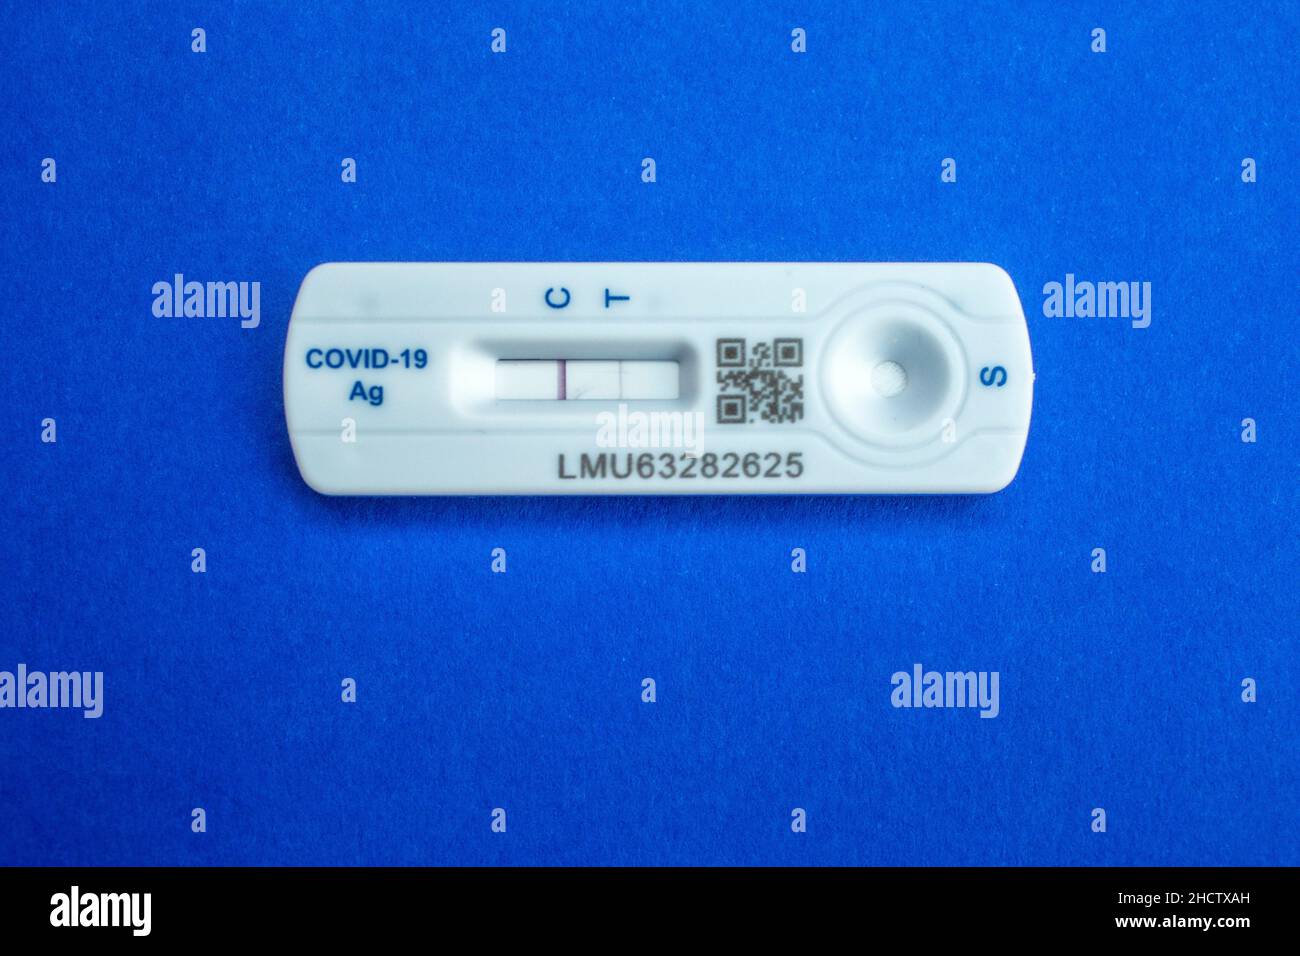 Quick testing for Covid-19 / SARS-CoV-2 infection concept: One rapid antigen test kit showing a positive result (two lines) Stock Photo